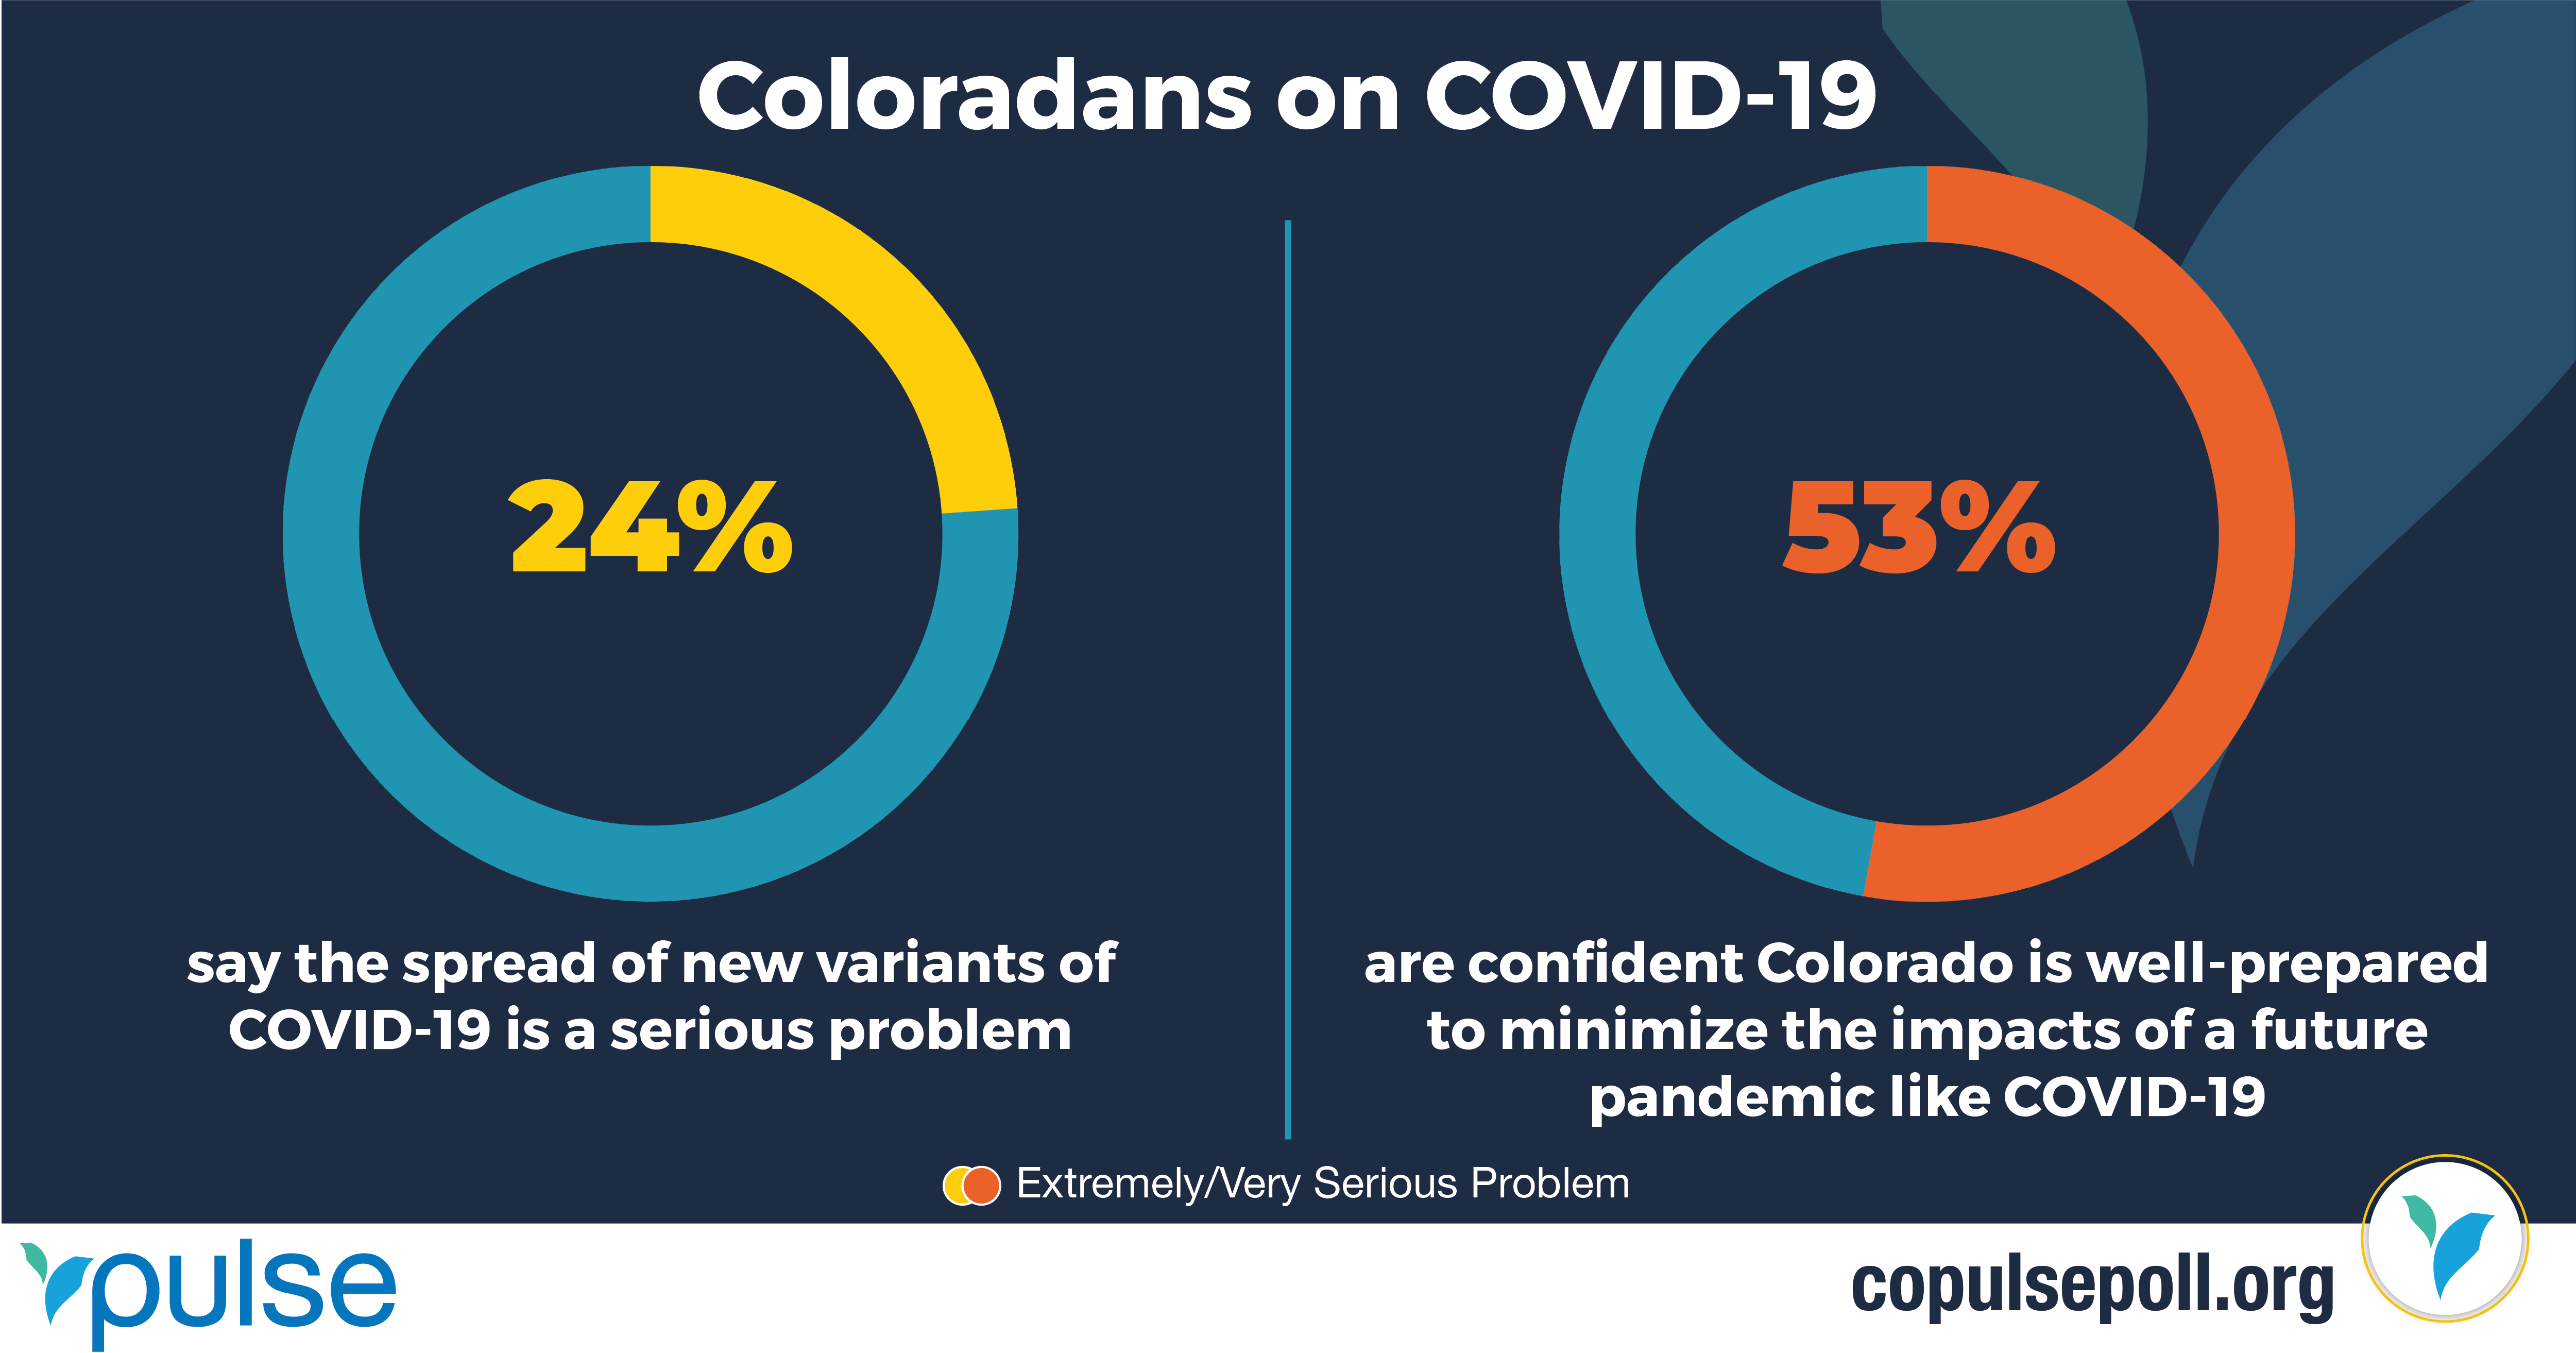 GRAPHIC: 24% of Coloradans say the spread of new variants of COVID-19 is a serious problem; 53% are confident Colorado is well-prepared to minimize the impacts of a future pandemic like COVID-19.